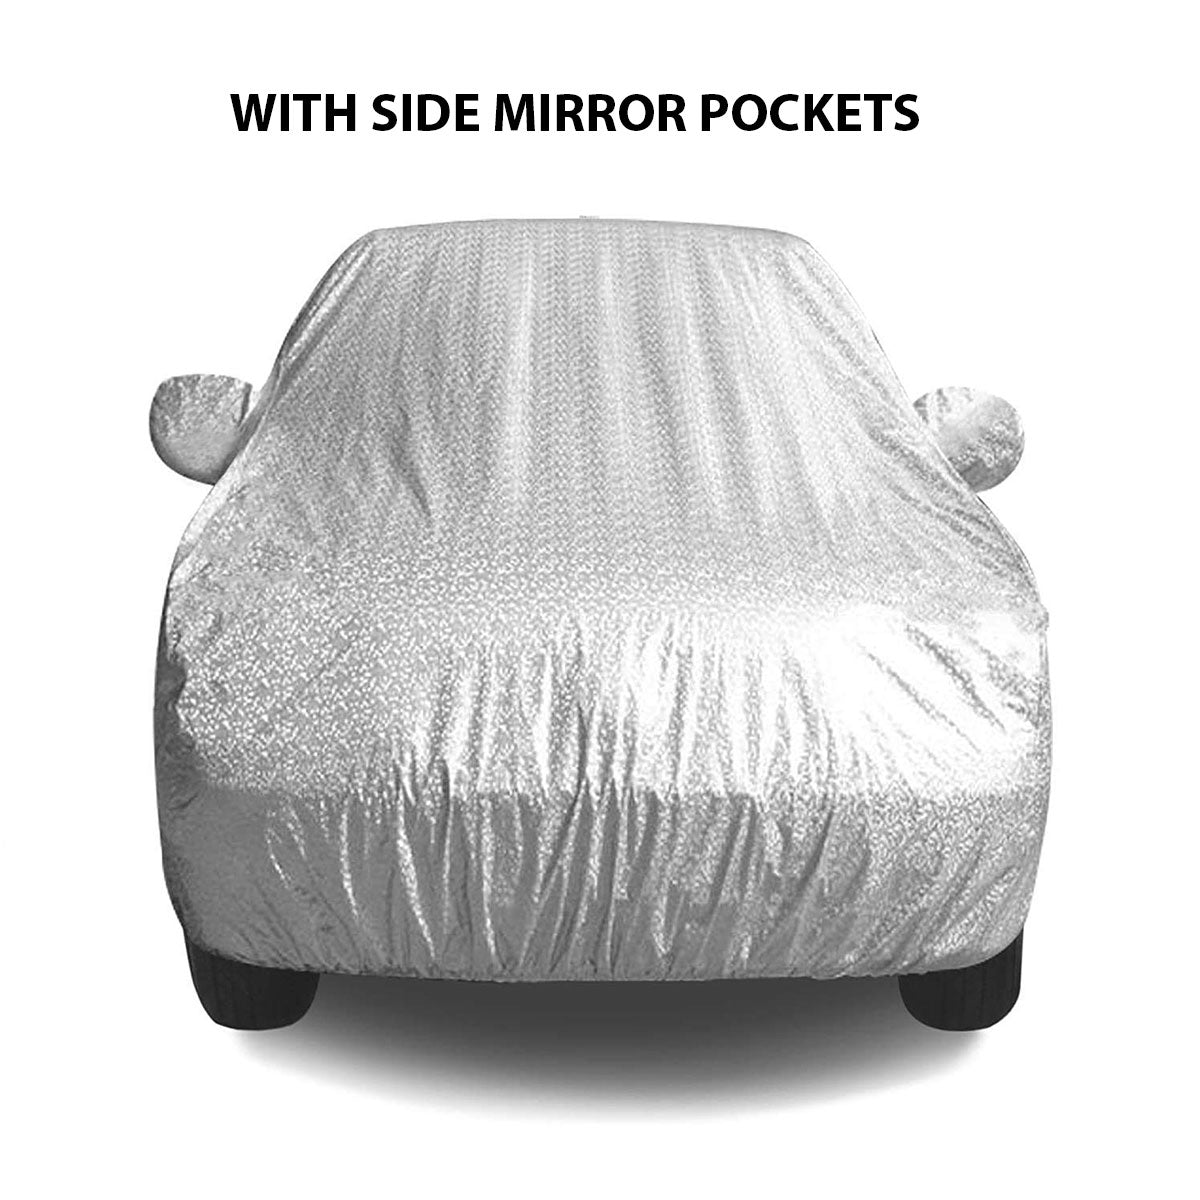 Oshotto Spyro Silver Anti Reflective, dustproof and Water Proof Car Body Cover with Mirror Pockets For Jaguar XJ